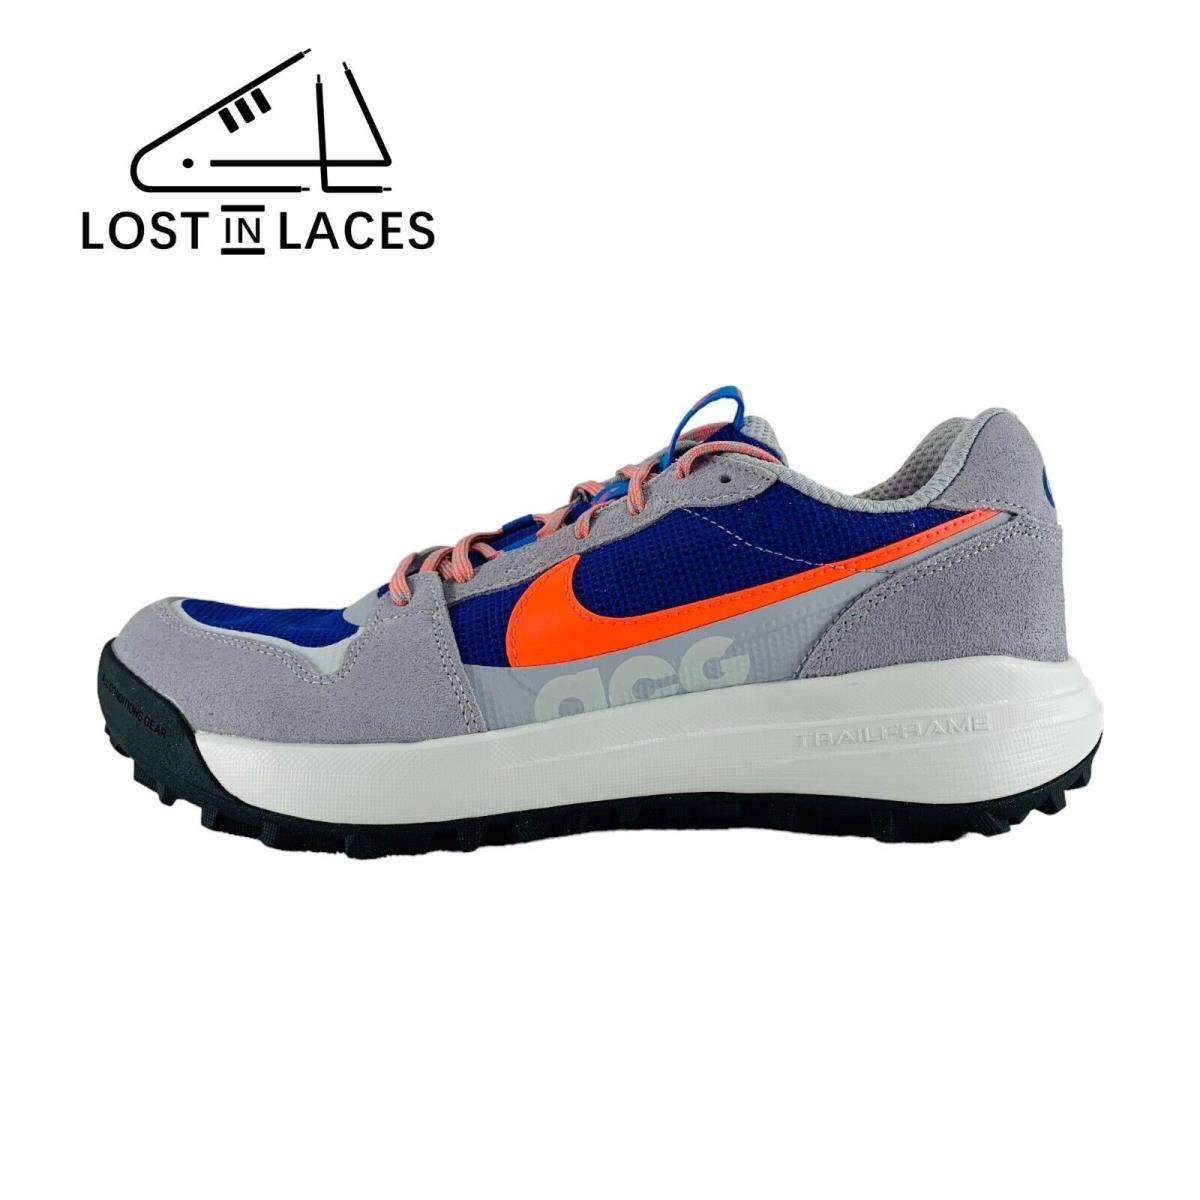 Nike Acg Lowcate Wolf Grey Bright Crimson Trail Running Shoes Men`s Sizes - Gray